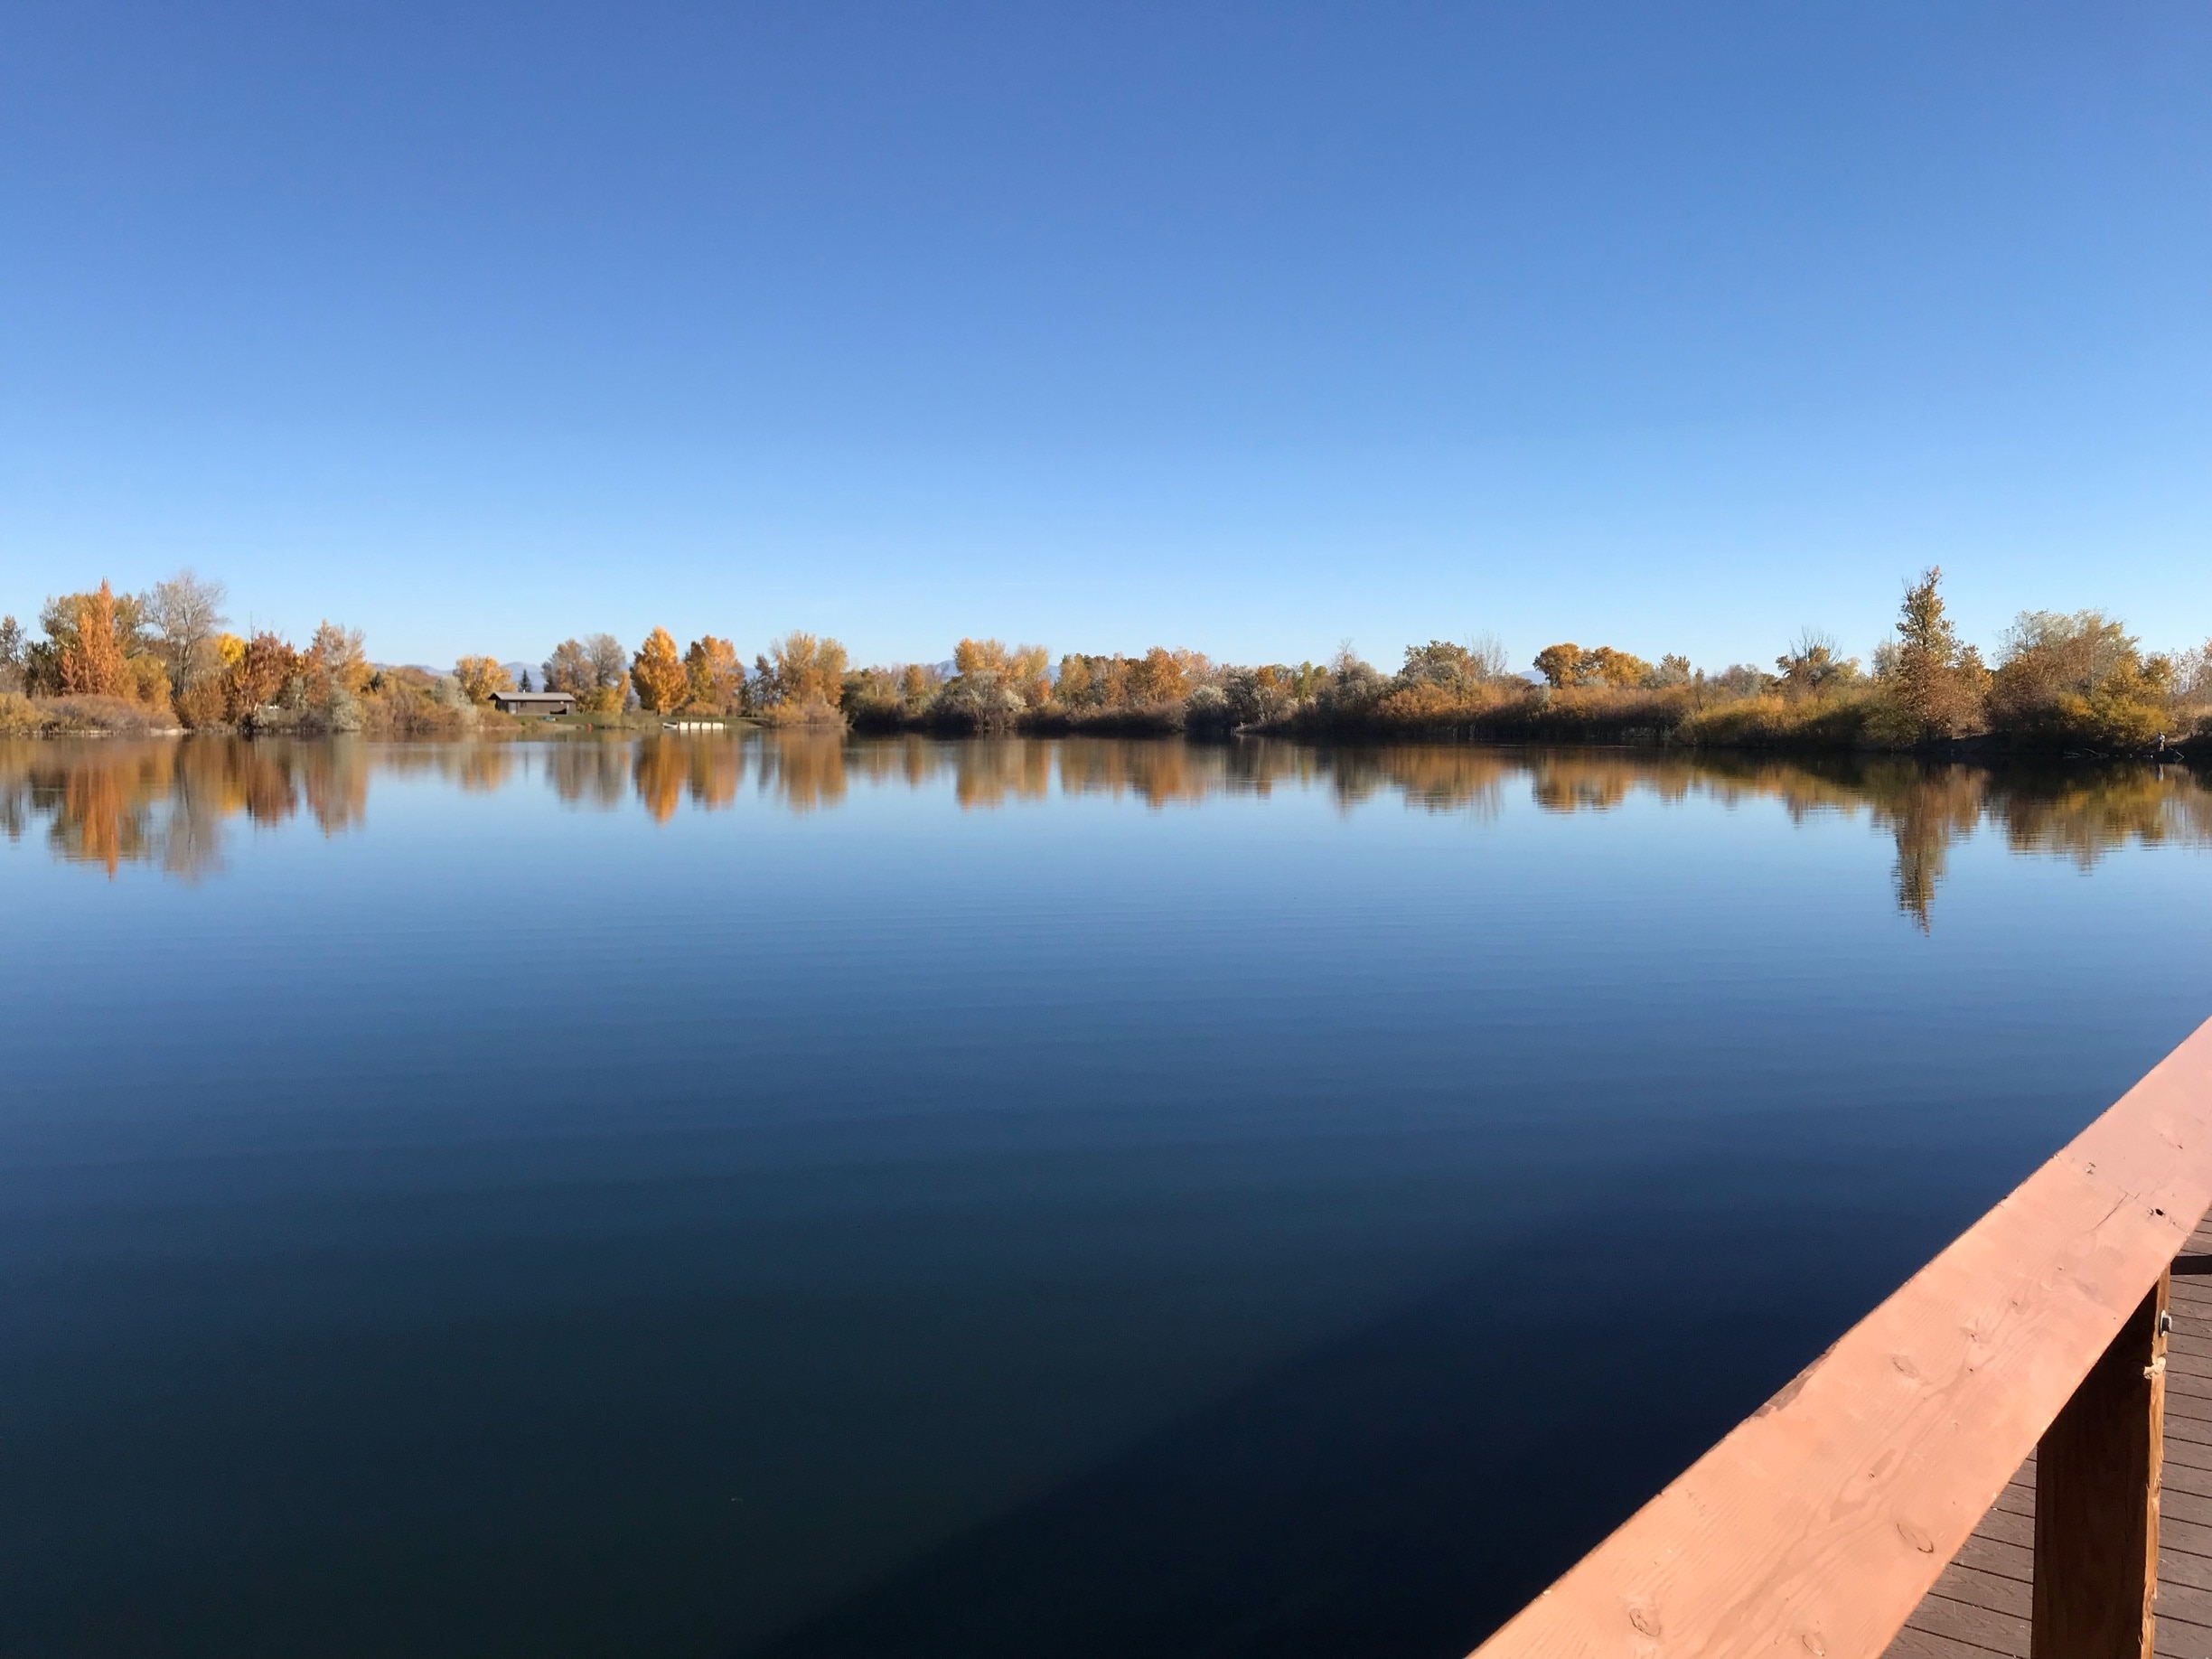 It’s amazing to have no wind in Helena. The water was so smooth when I took this picture from the fishing pier on the south side of the lake.